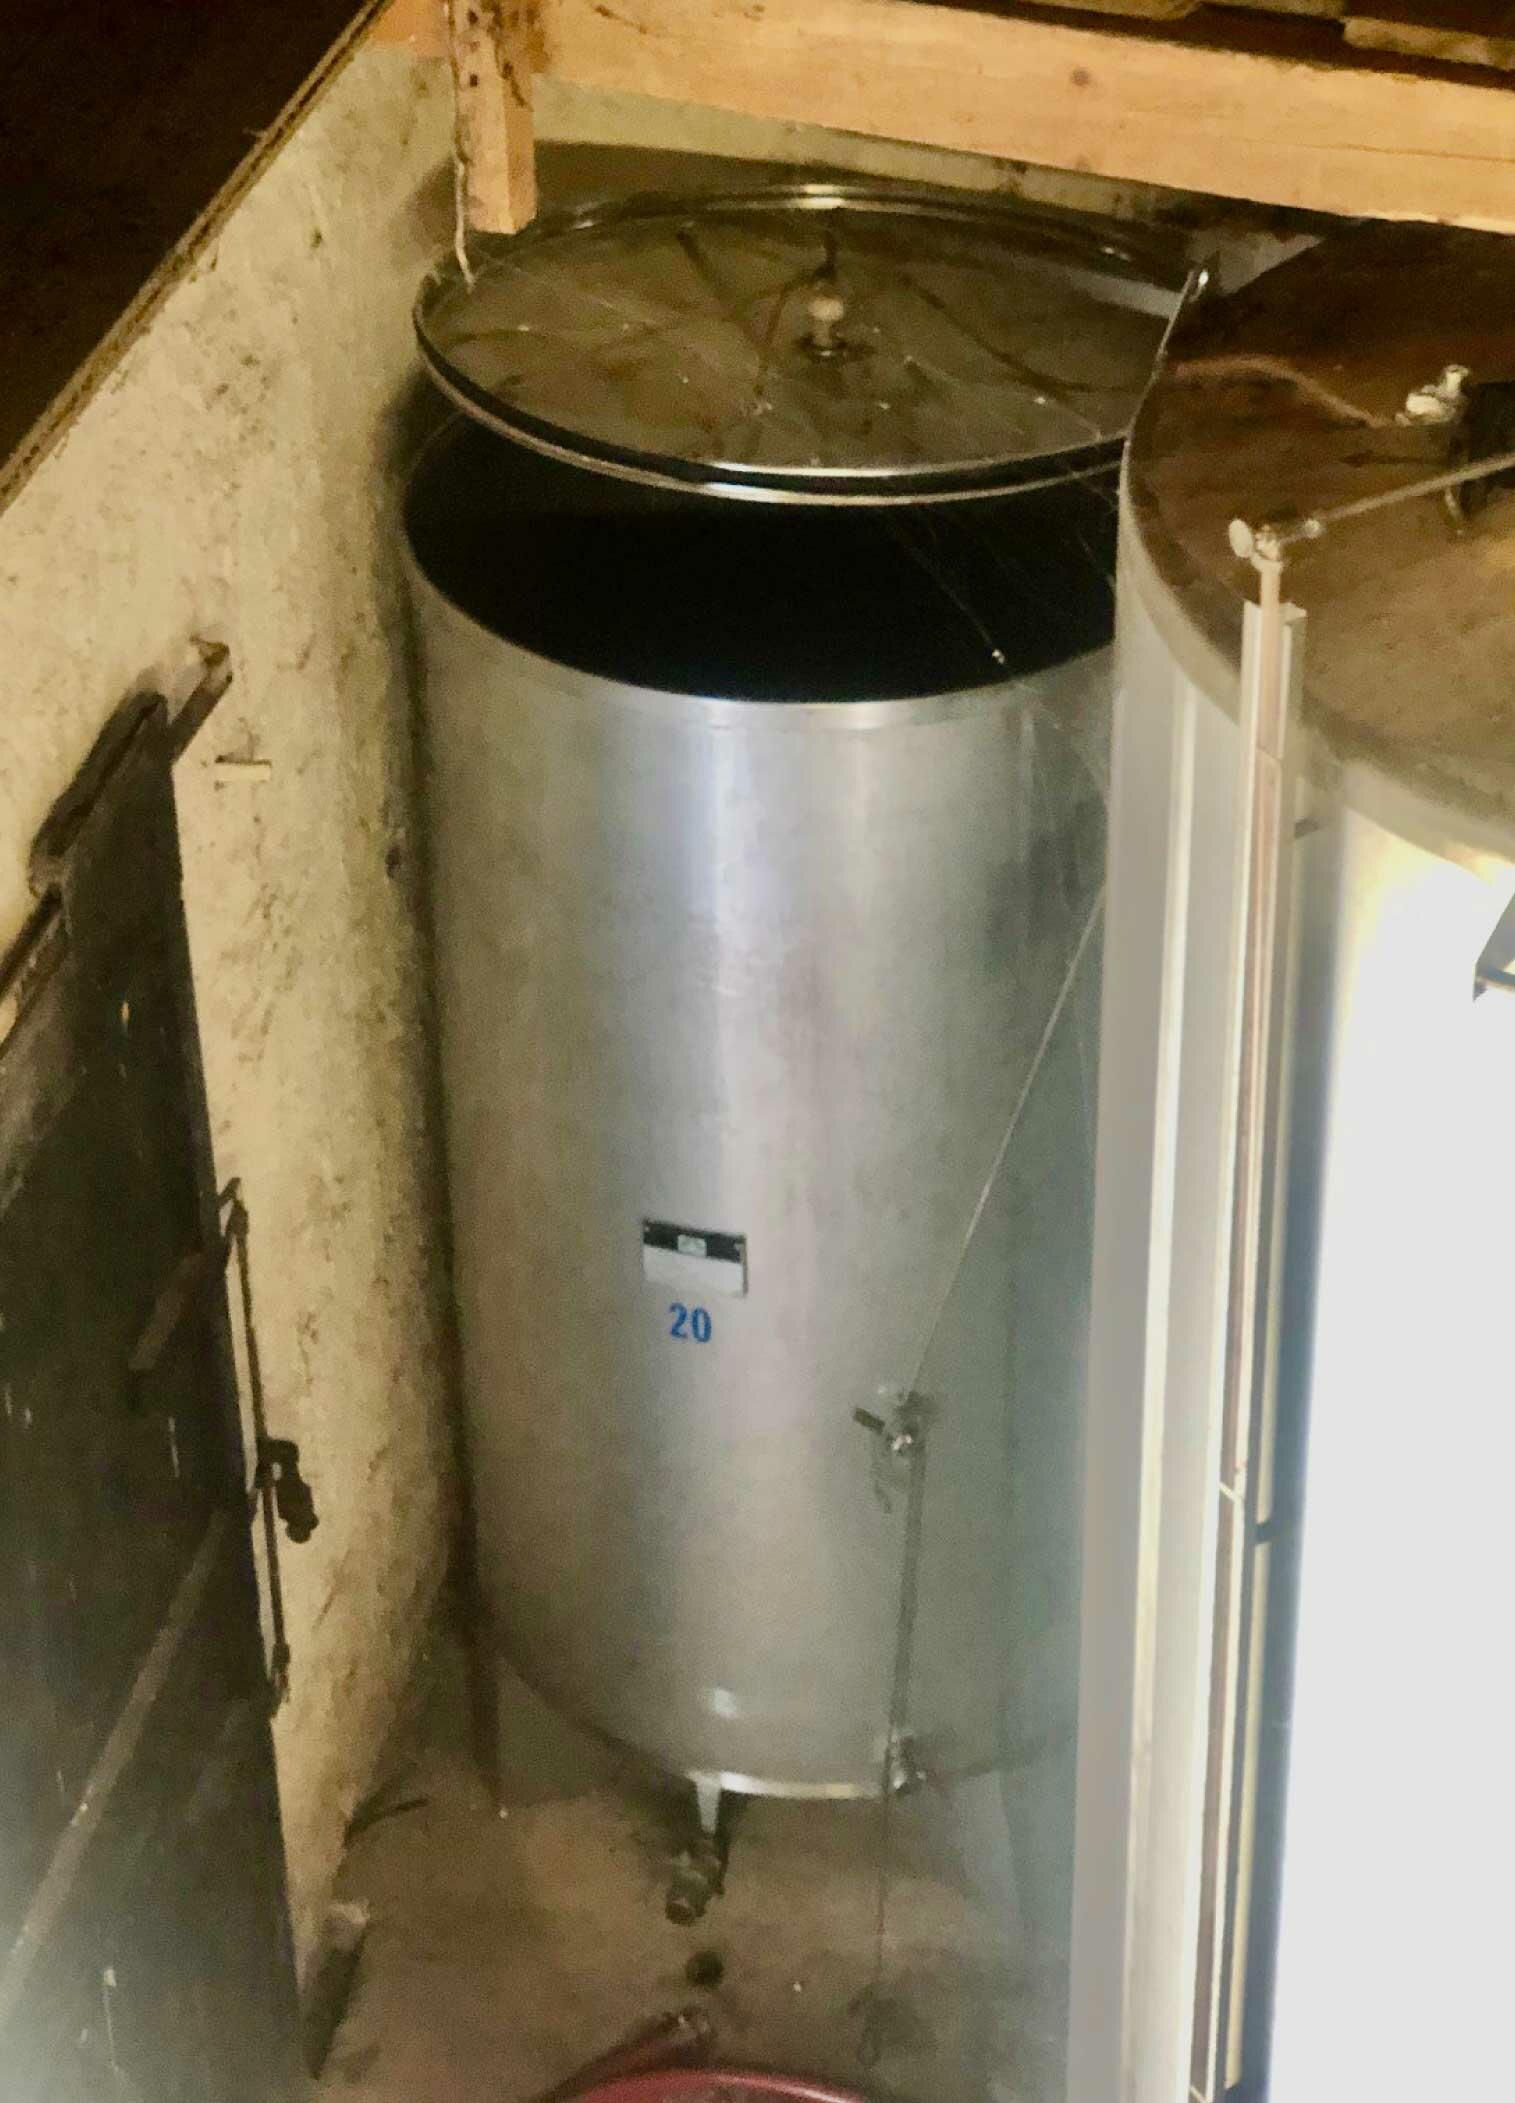 Stainless steel tank with floating cap - On feet